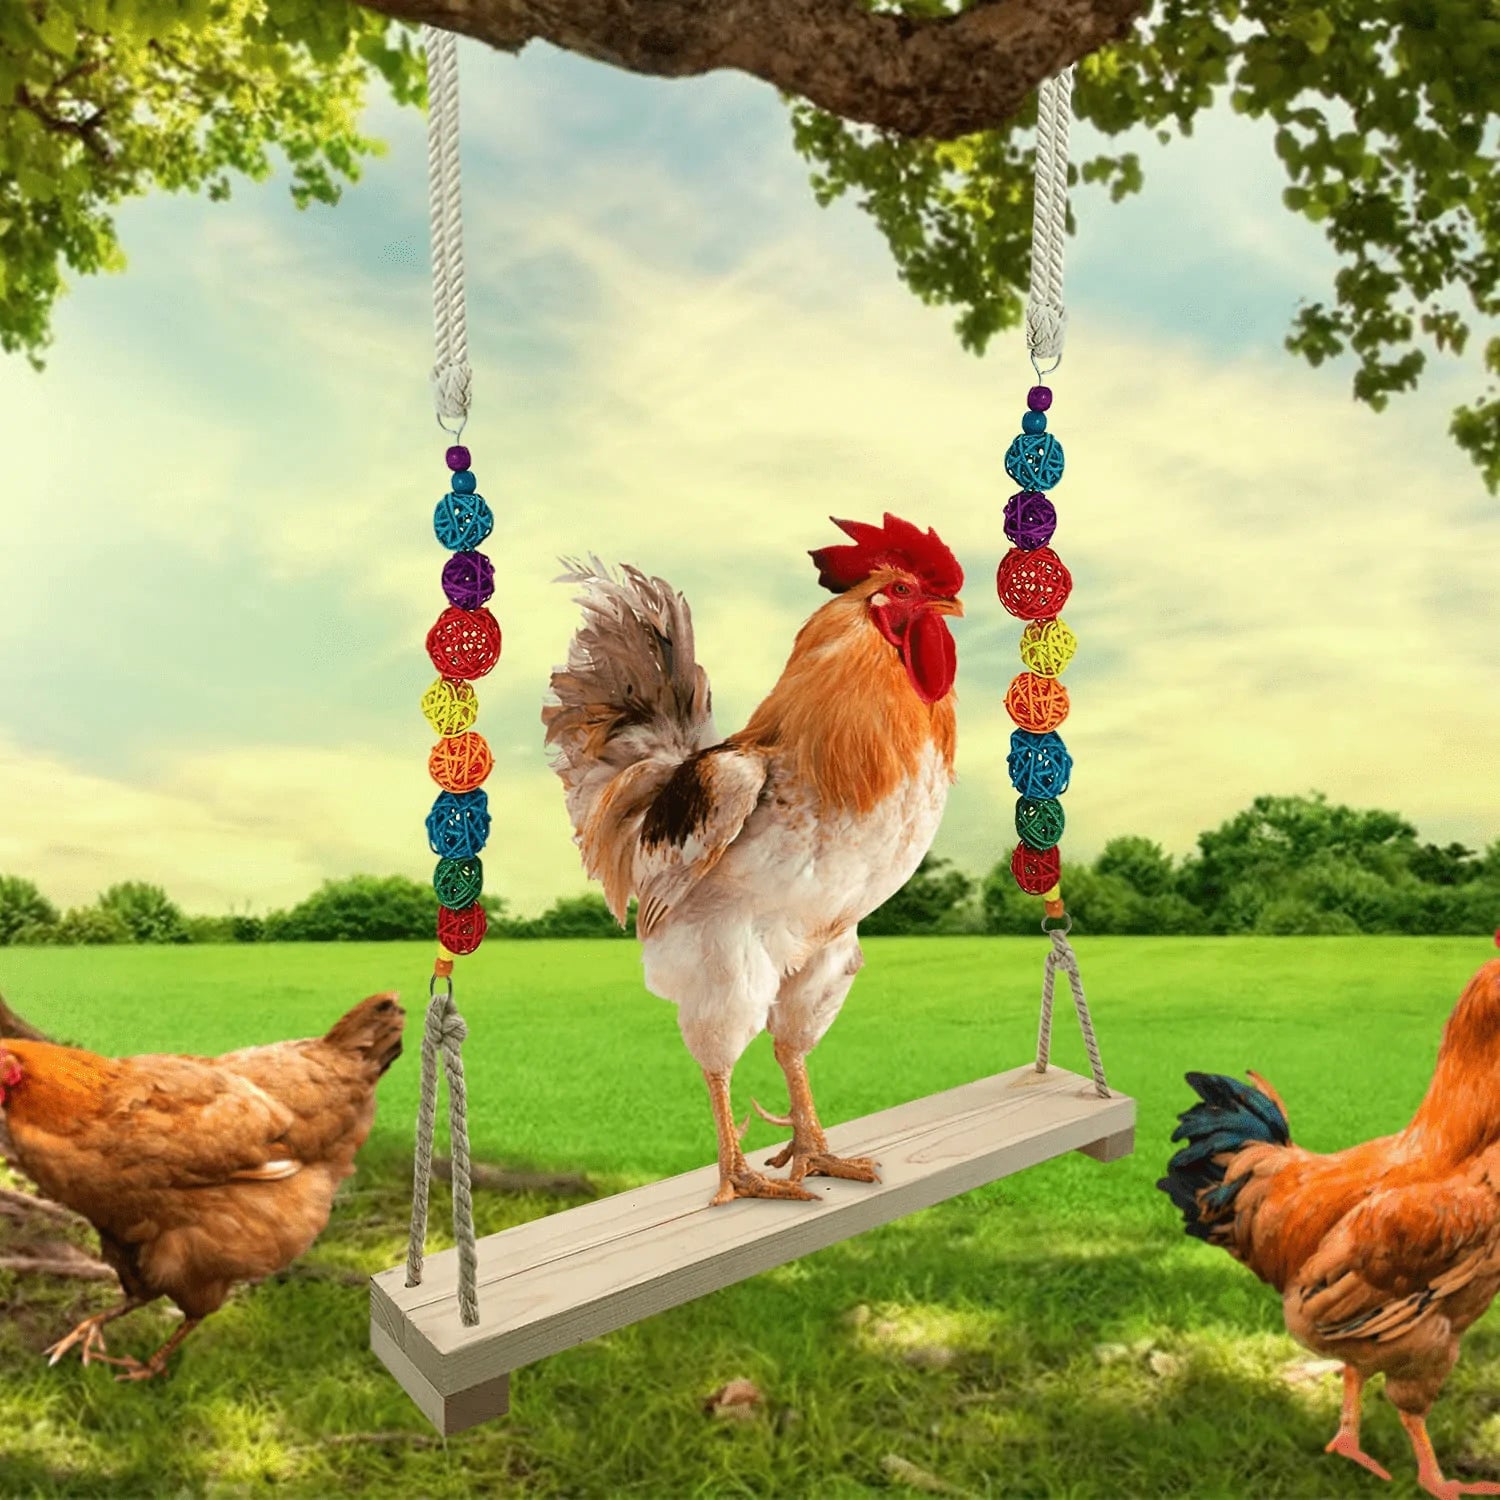 Chicken Swing,Chicken Perch,Wood Stand for Chick,Ladder Toys for Bird,Handmade Coop Swing for Chicken Bird,Parrot,Hens,Small Parakeets,Cockatiels,Macaws,Large Pet, Safe and Relief of Stress